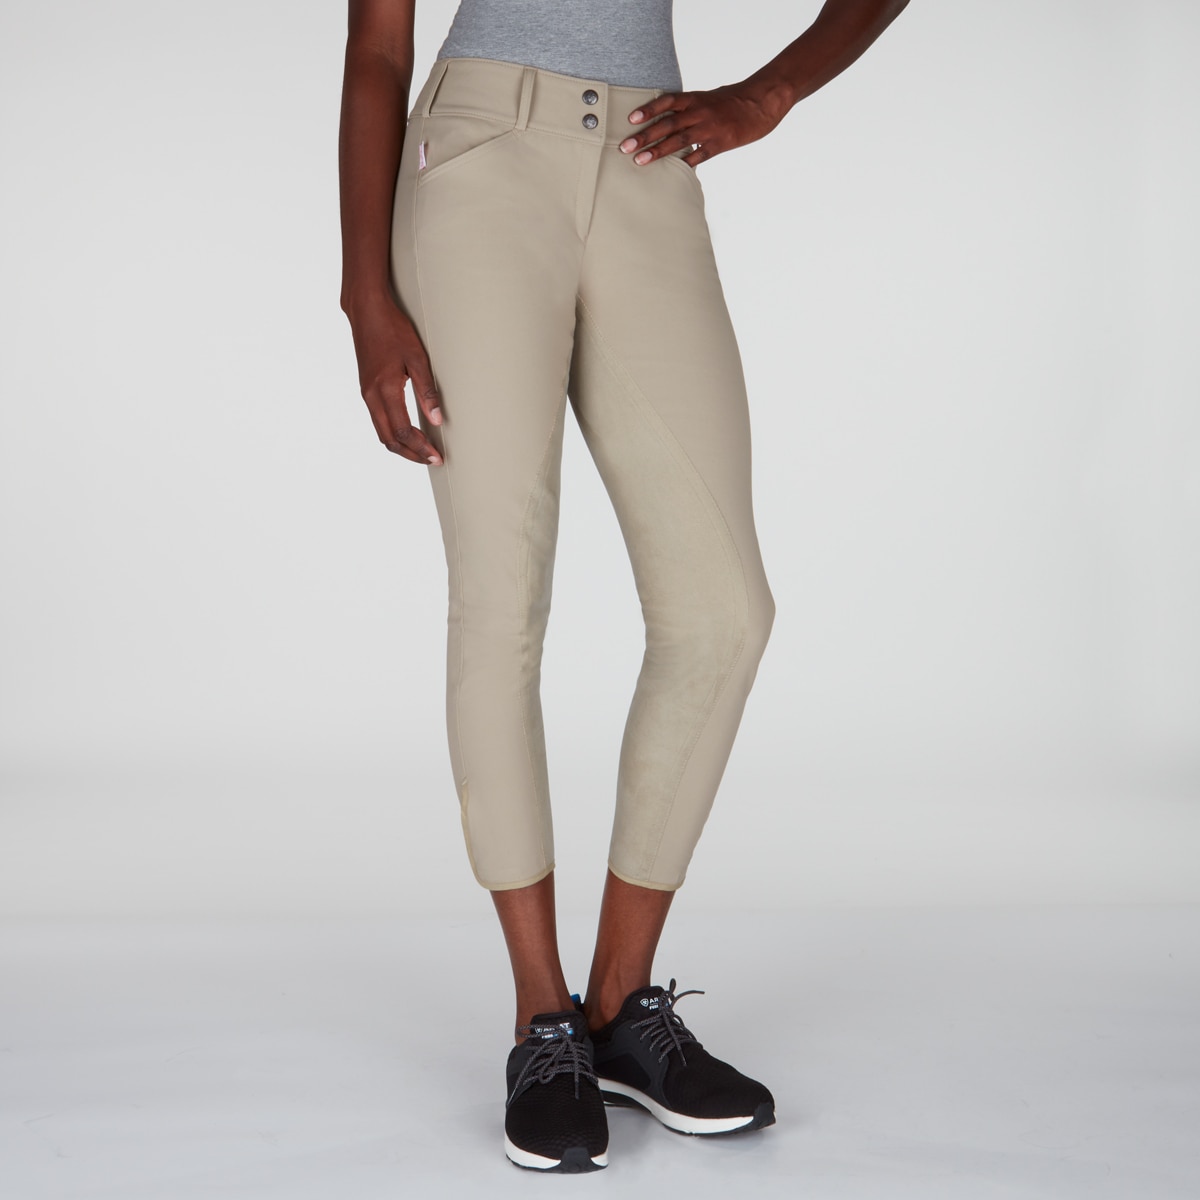 The Tailored Sportsman Trophy Hunter Full Seat Breeches